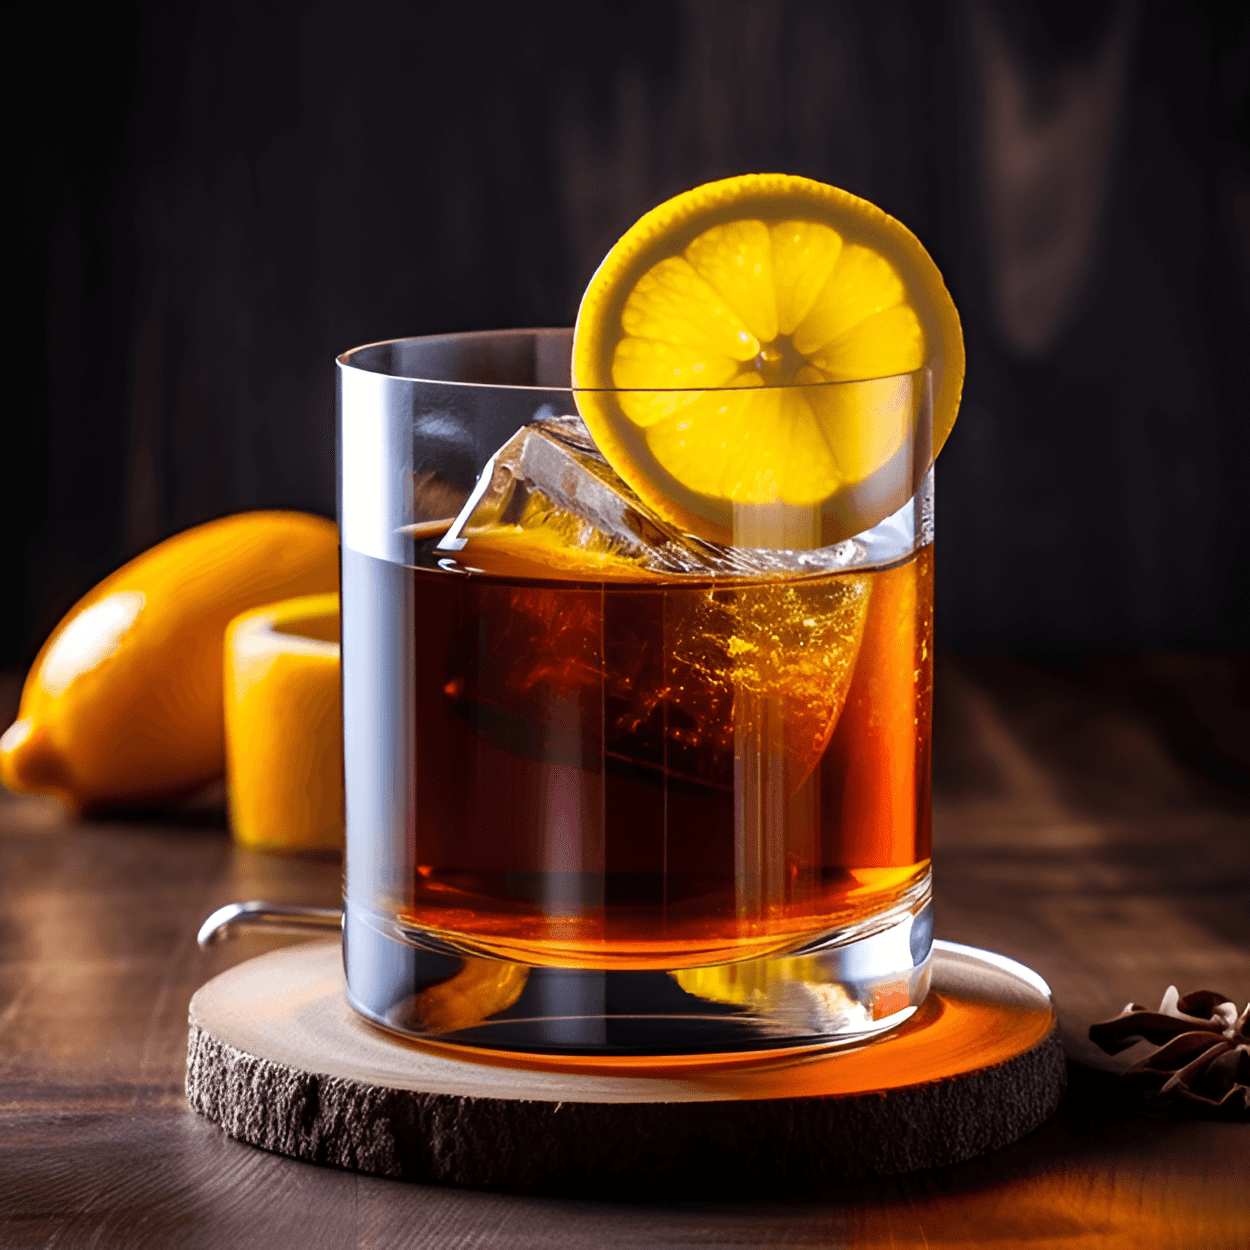 Nocino Cocktail Recipe - Nocino has a rich, complex and slightly bitter taste. It has notes of walnut, vanilla, and spices, with a hint of sweetness. The finish is long and warming, with a pleasant bitterness that lingers on the palate.